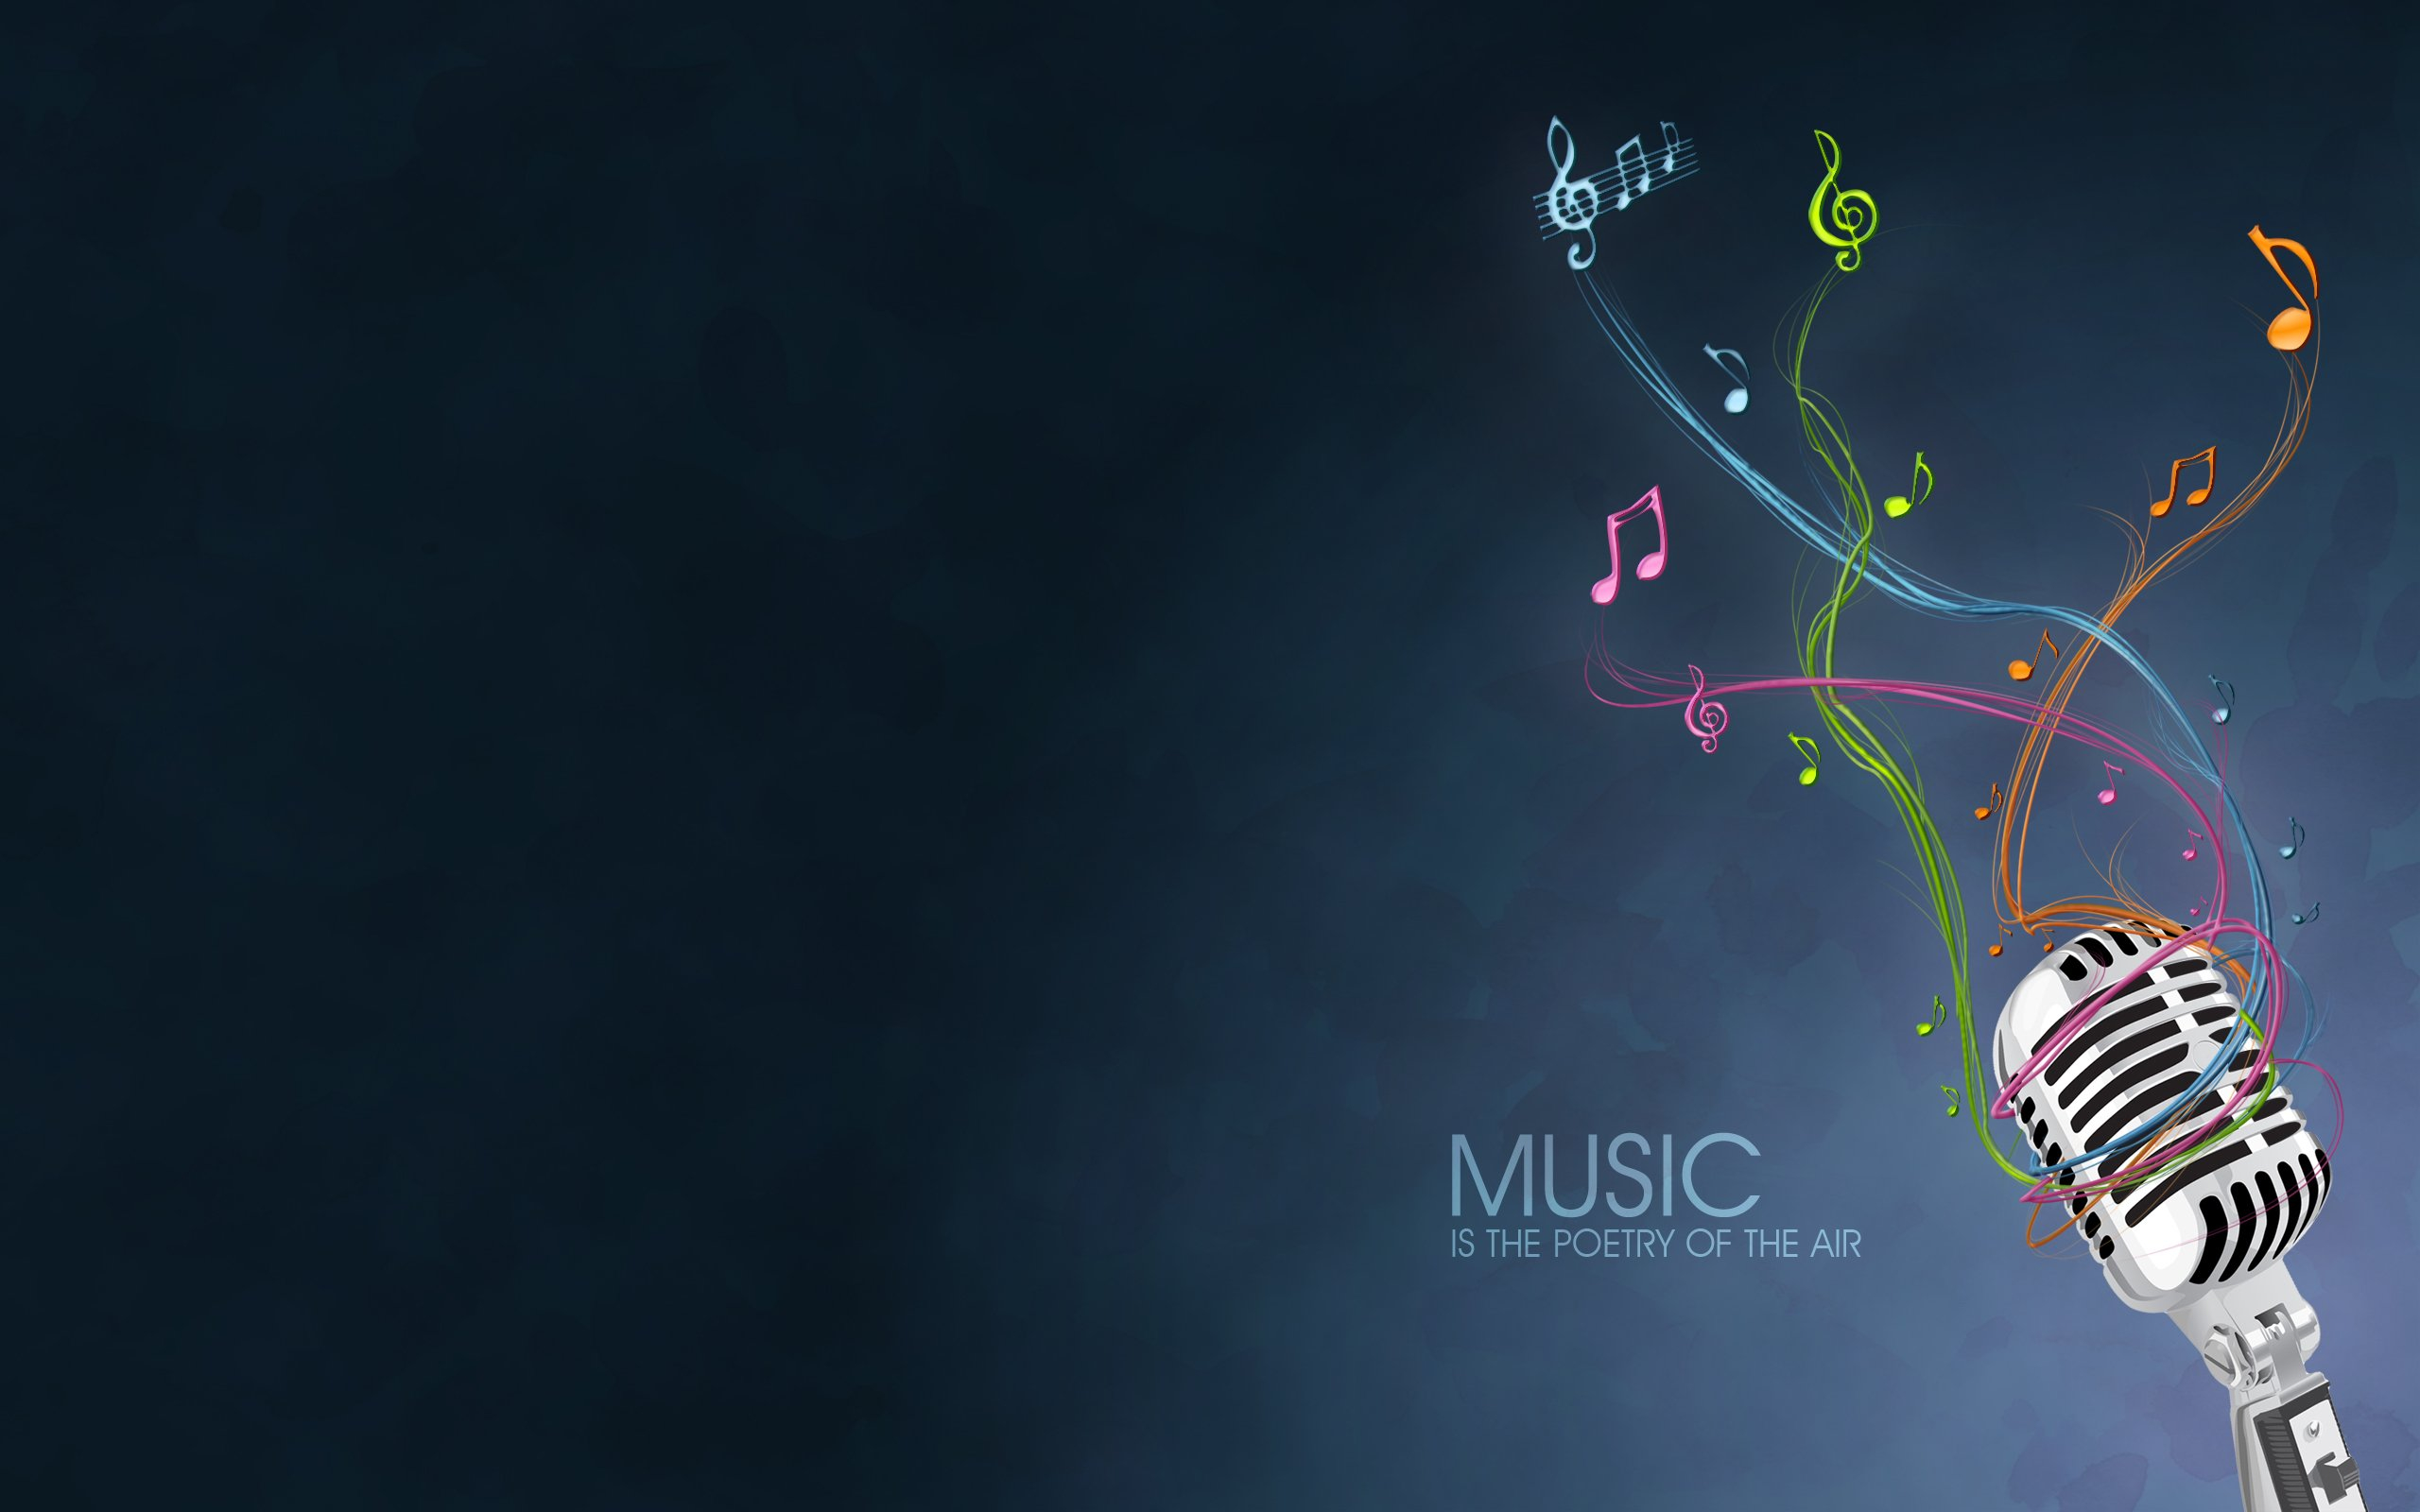 2560x1600 Free download Music Notes Wallpaper 9815 Hd Wallpapers in Music Imagescicom [] for your Desktop, Mobile \u0026 Tablet | Explore 77+ Music Computer Wallpapers | Music Background Wallpaper, Free Music Wallpaper